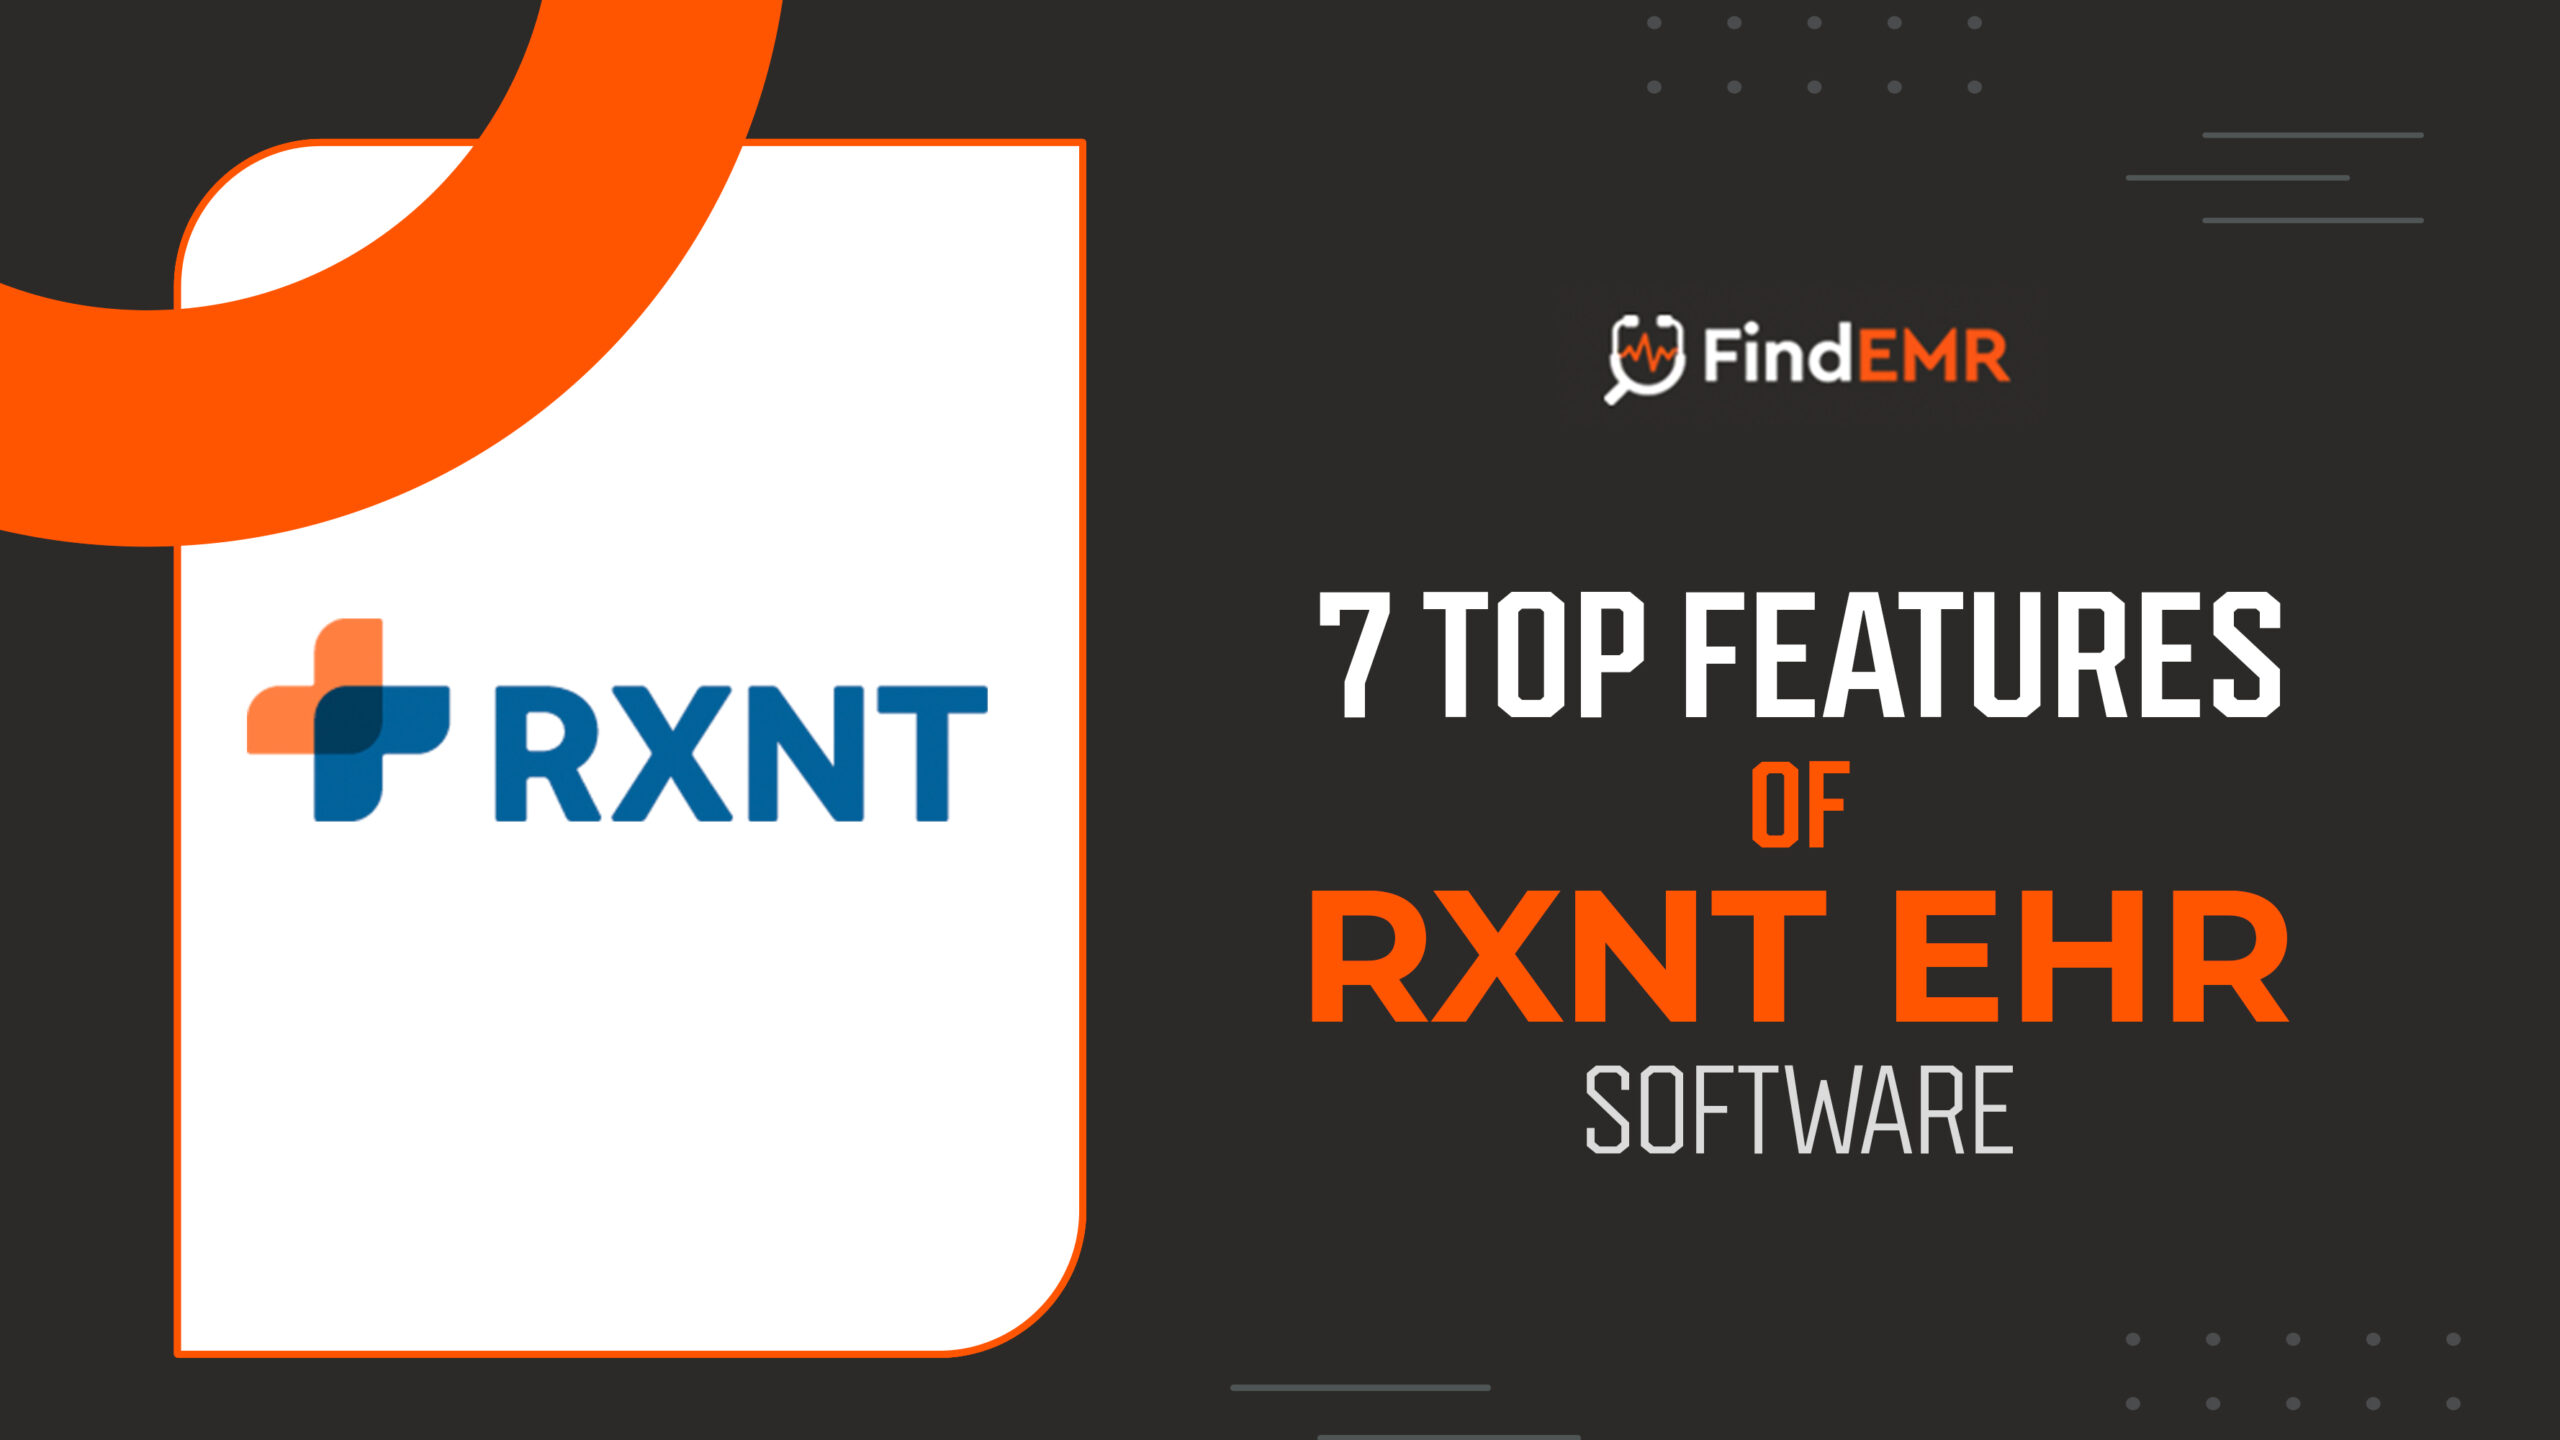 7 Top features of RXNT EHR Software